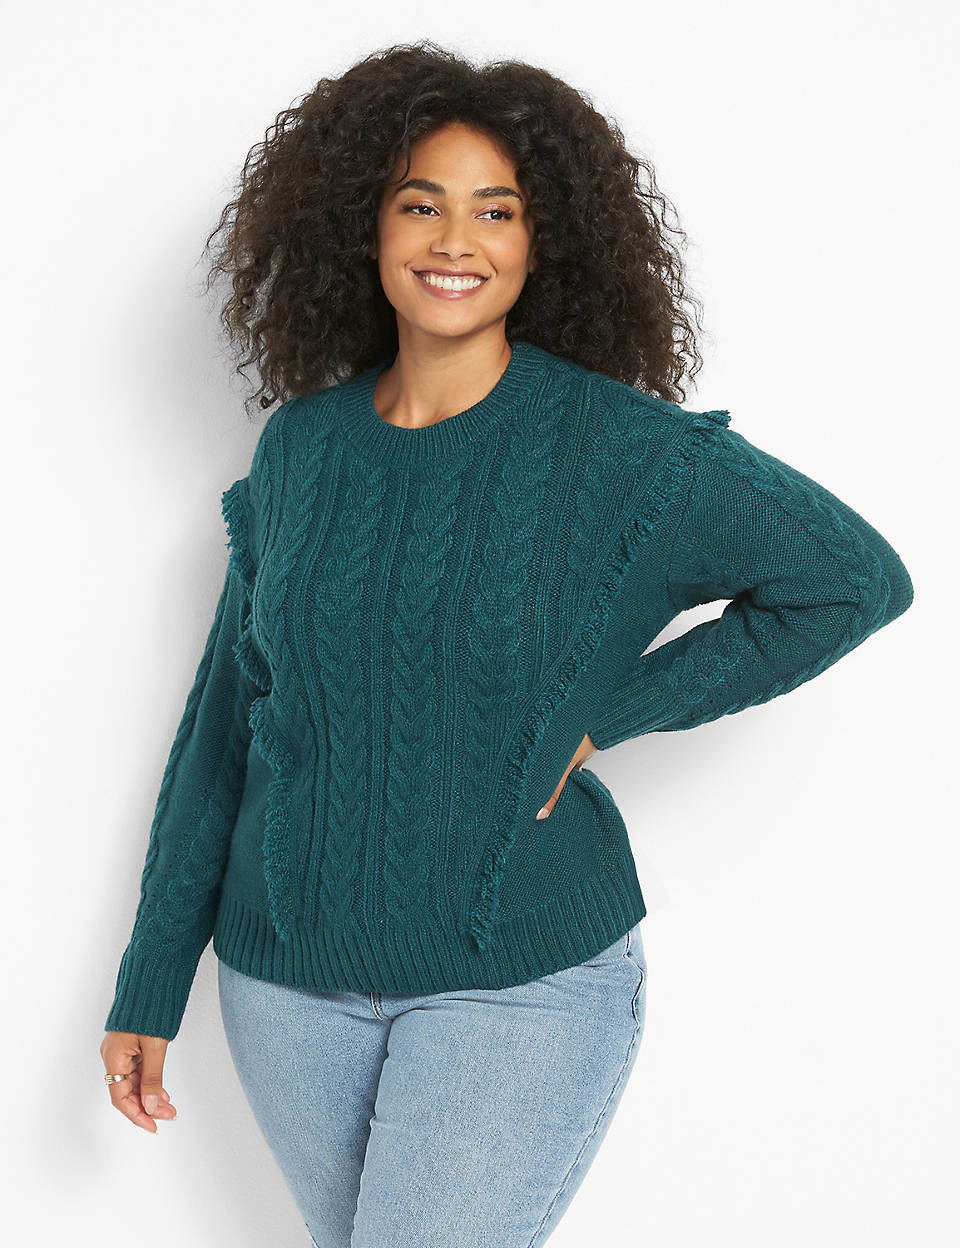 model wearing the cable knit sweater in teal